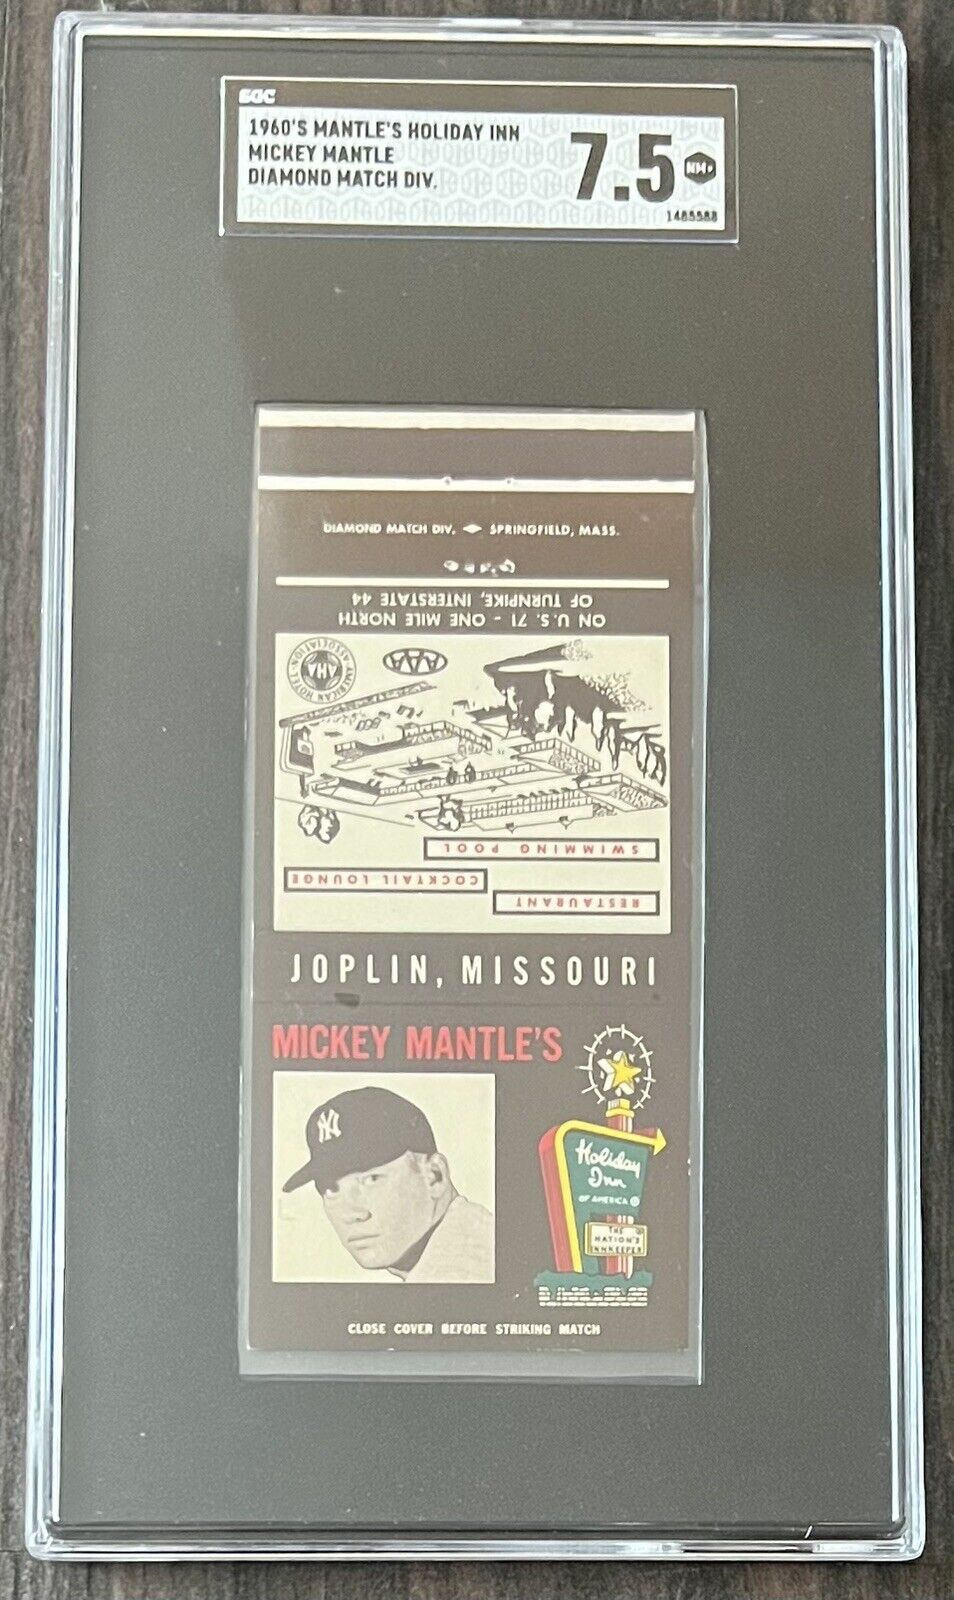 1960’s Mantle’s Holiday Inn Mickey Mantle Matchbook Cover SGC 7.5 NM+